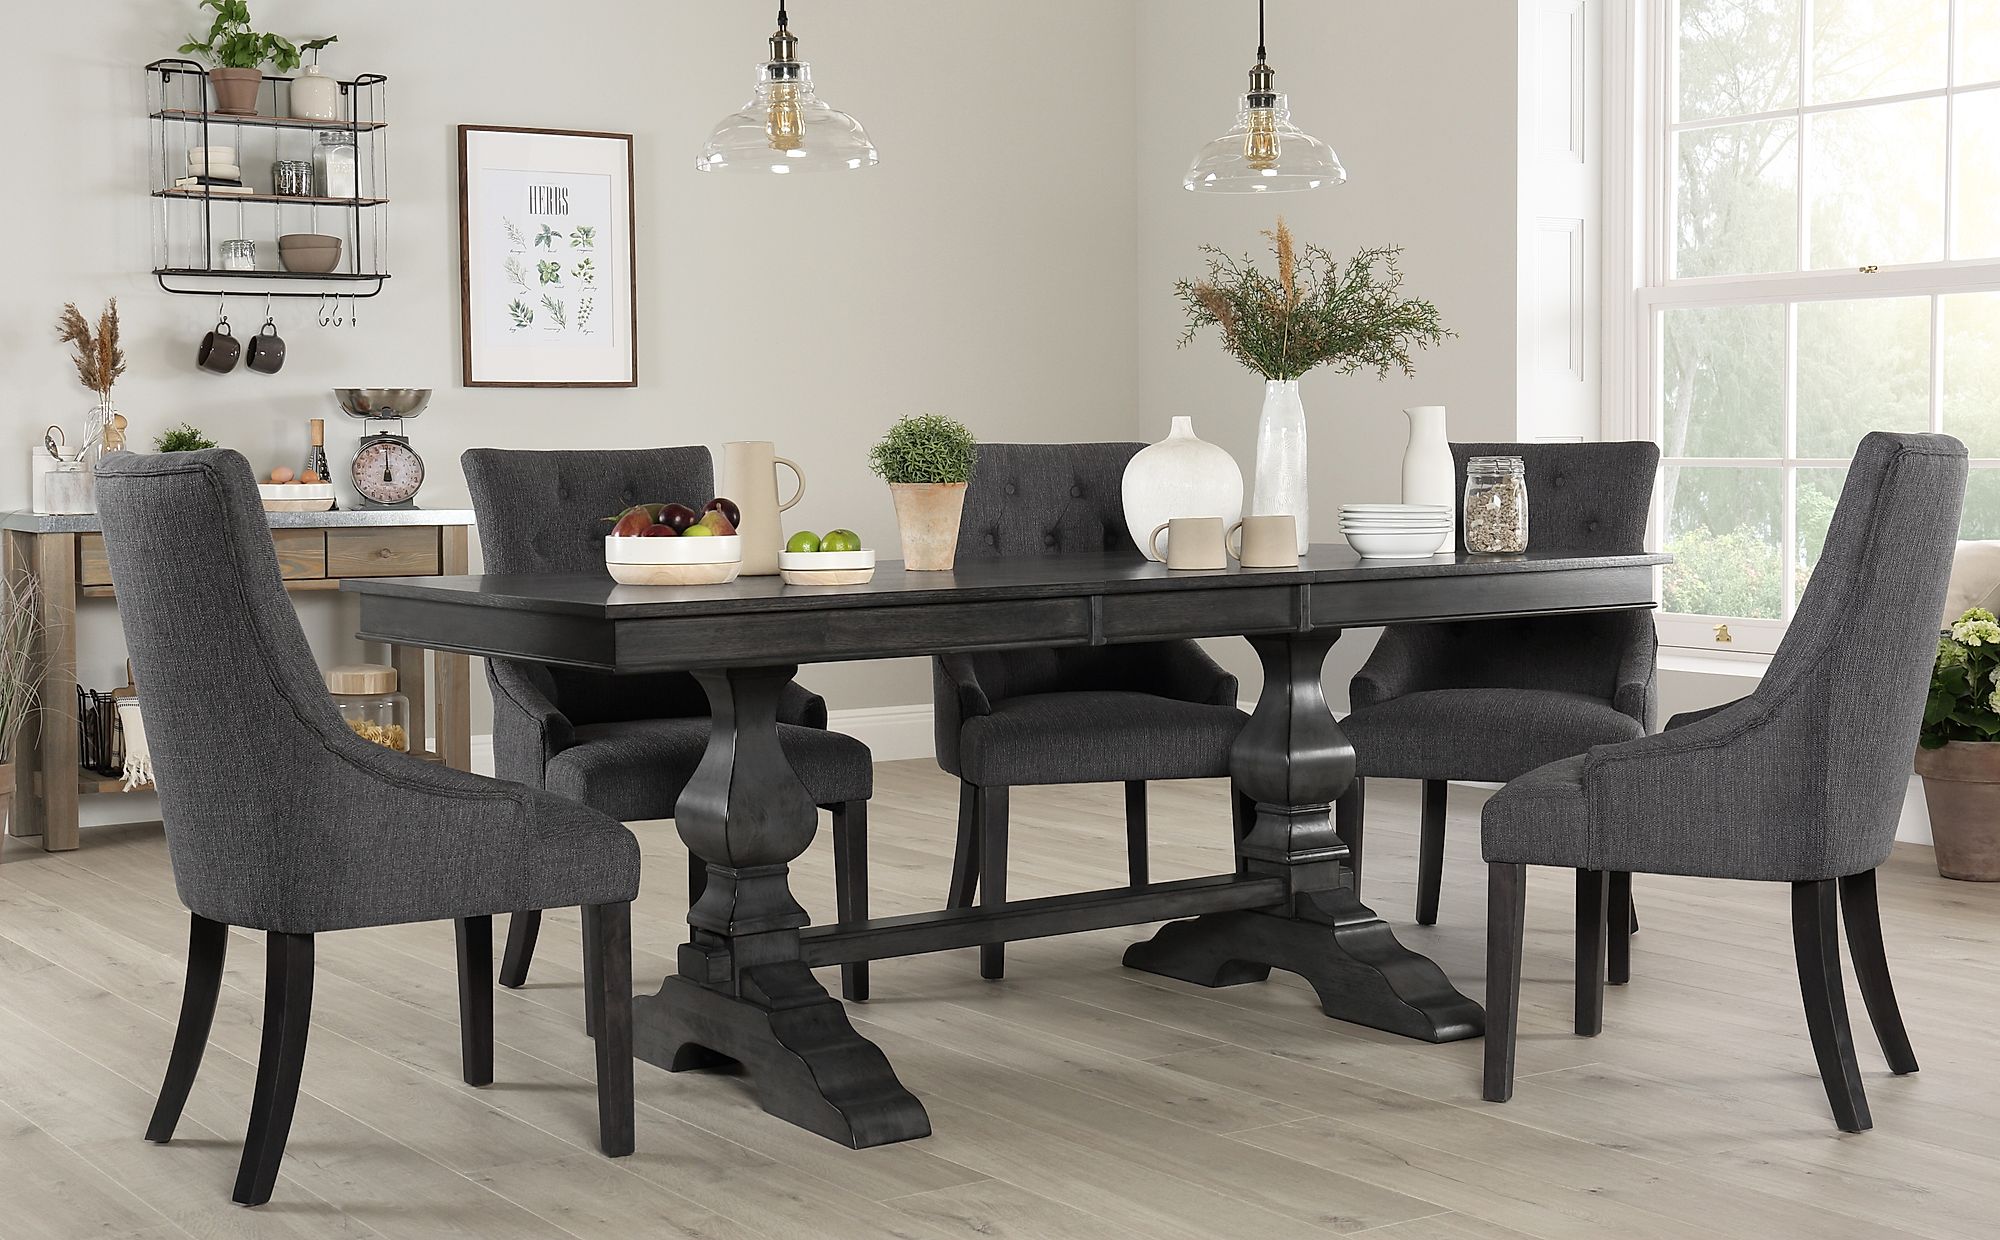 Extendable Dining Room Table Grey With Bench